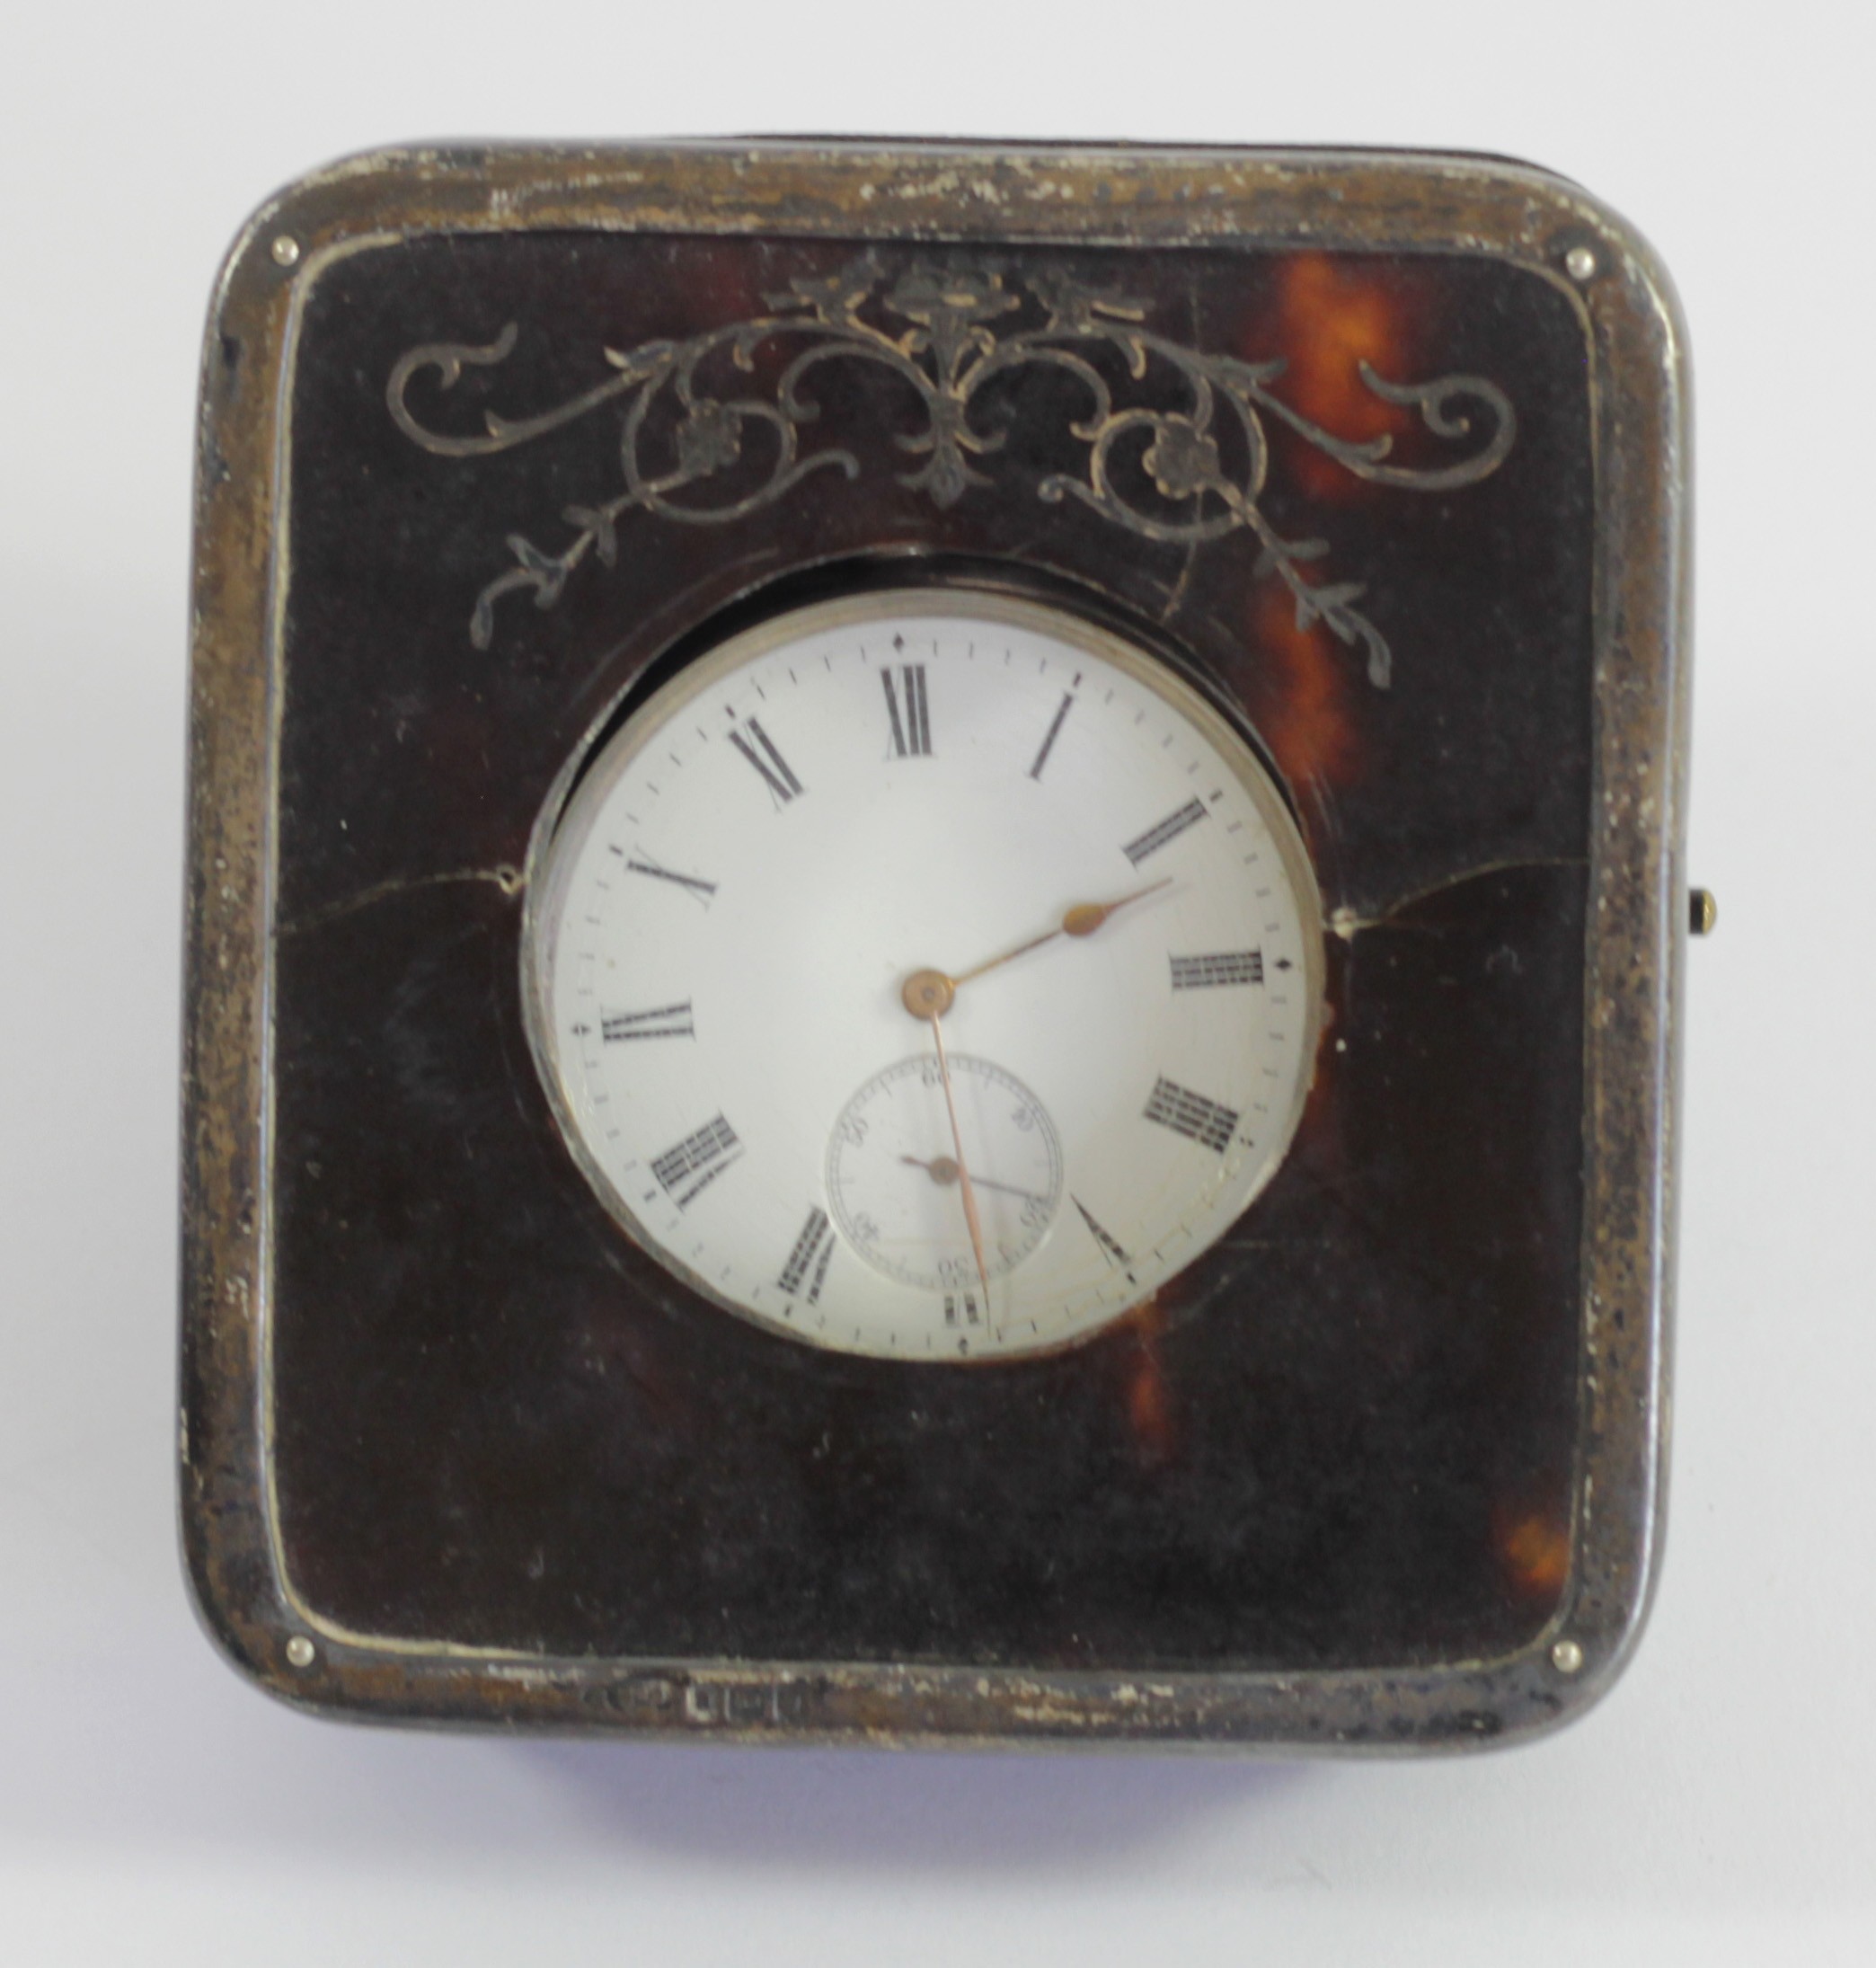 A Victorian silver and tortoiseshell pocket watch easel case, London 1896, containing a 0.935